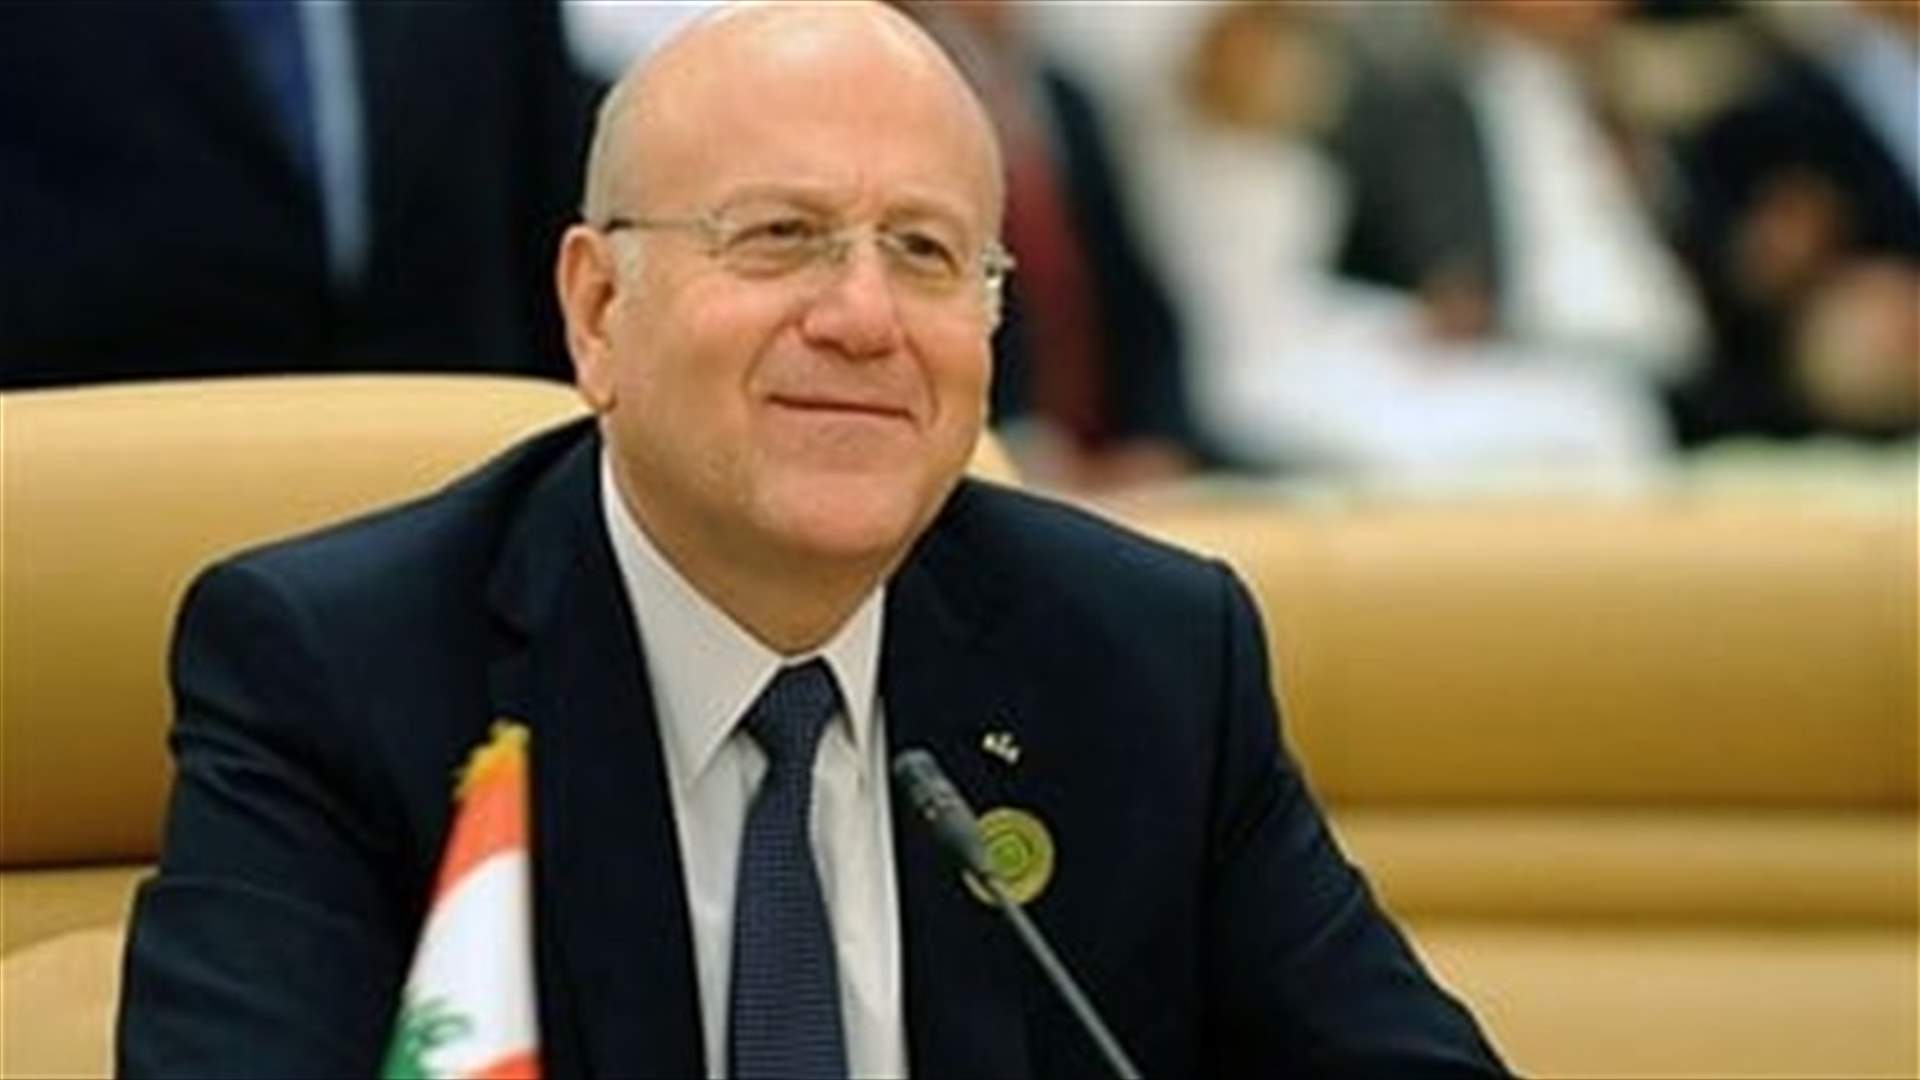 Mikati: Cooperation of all parties required to put Lebanon on recovery path